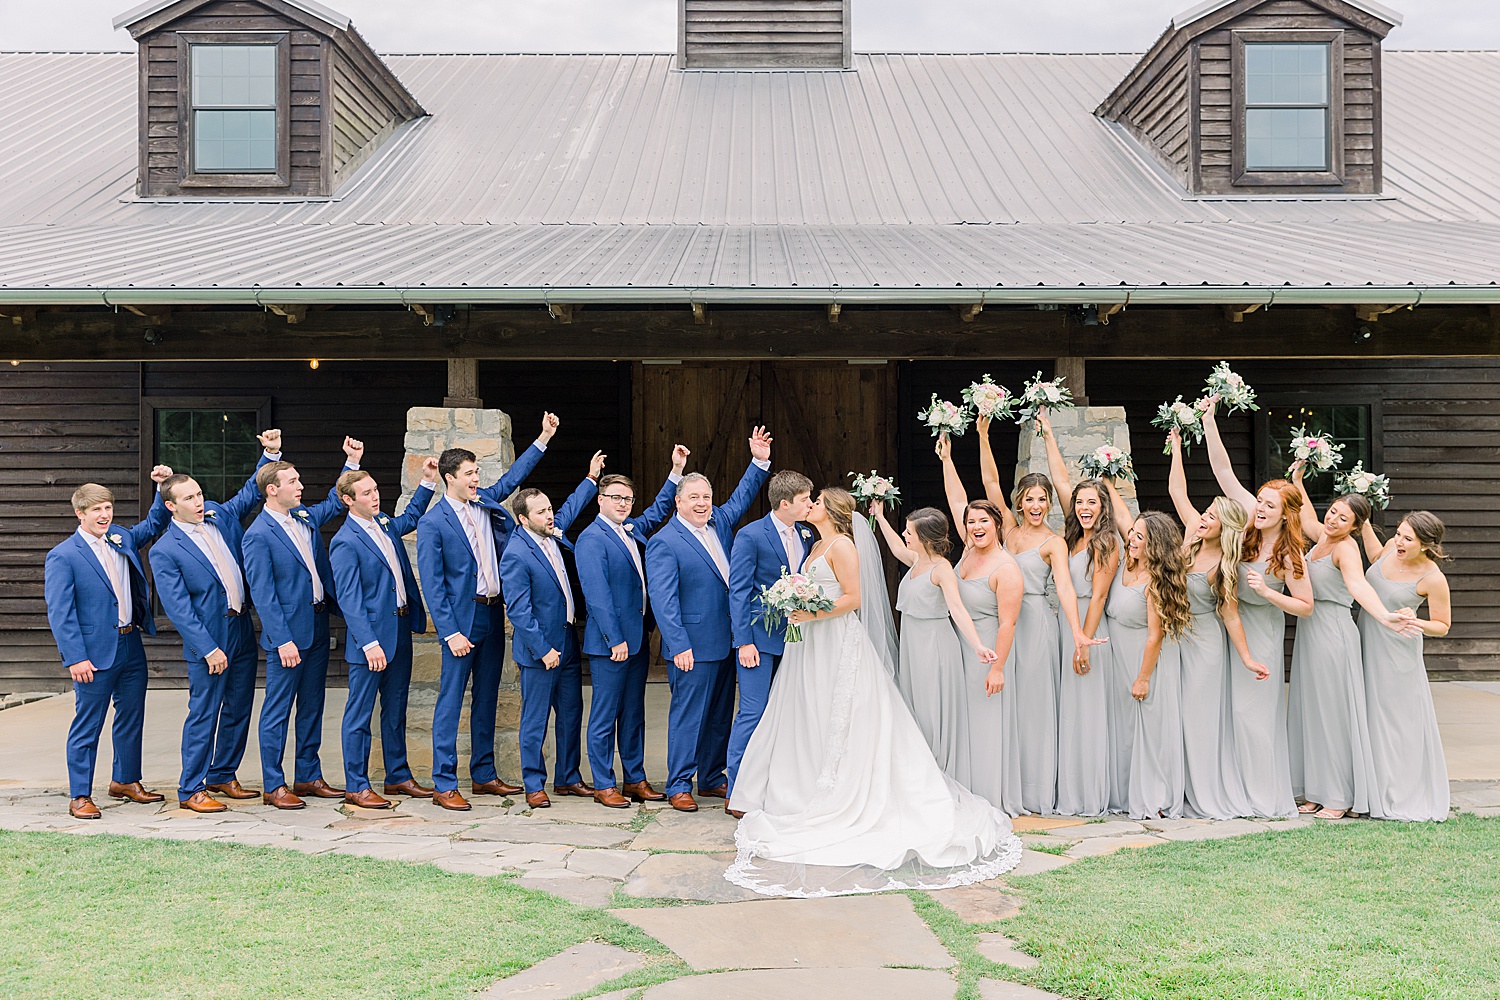 bride + groom kiss surrounded by bridal party during AL wedding at The Barn at Shady Lane captured by Chelsea Morton Photography